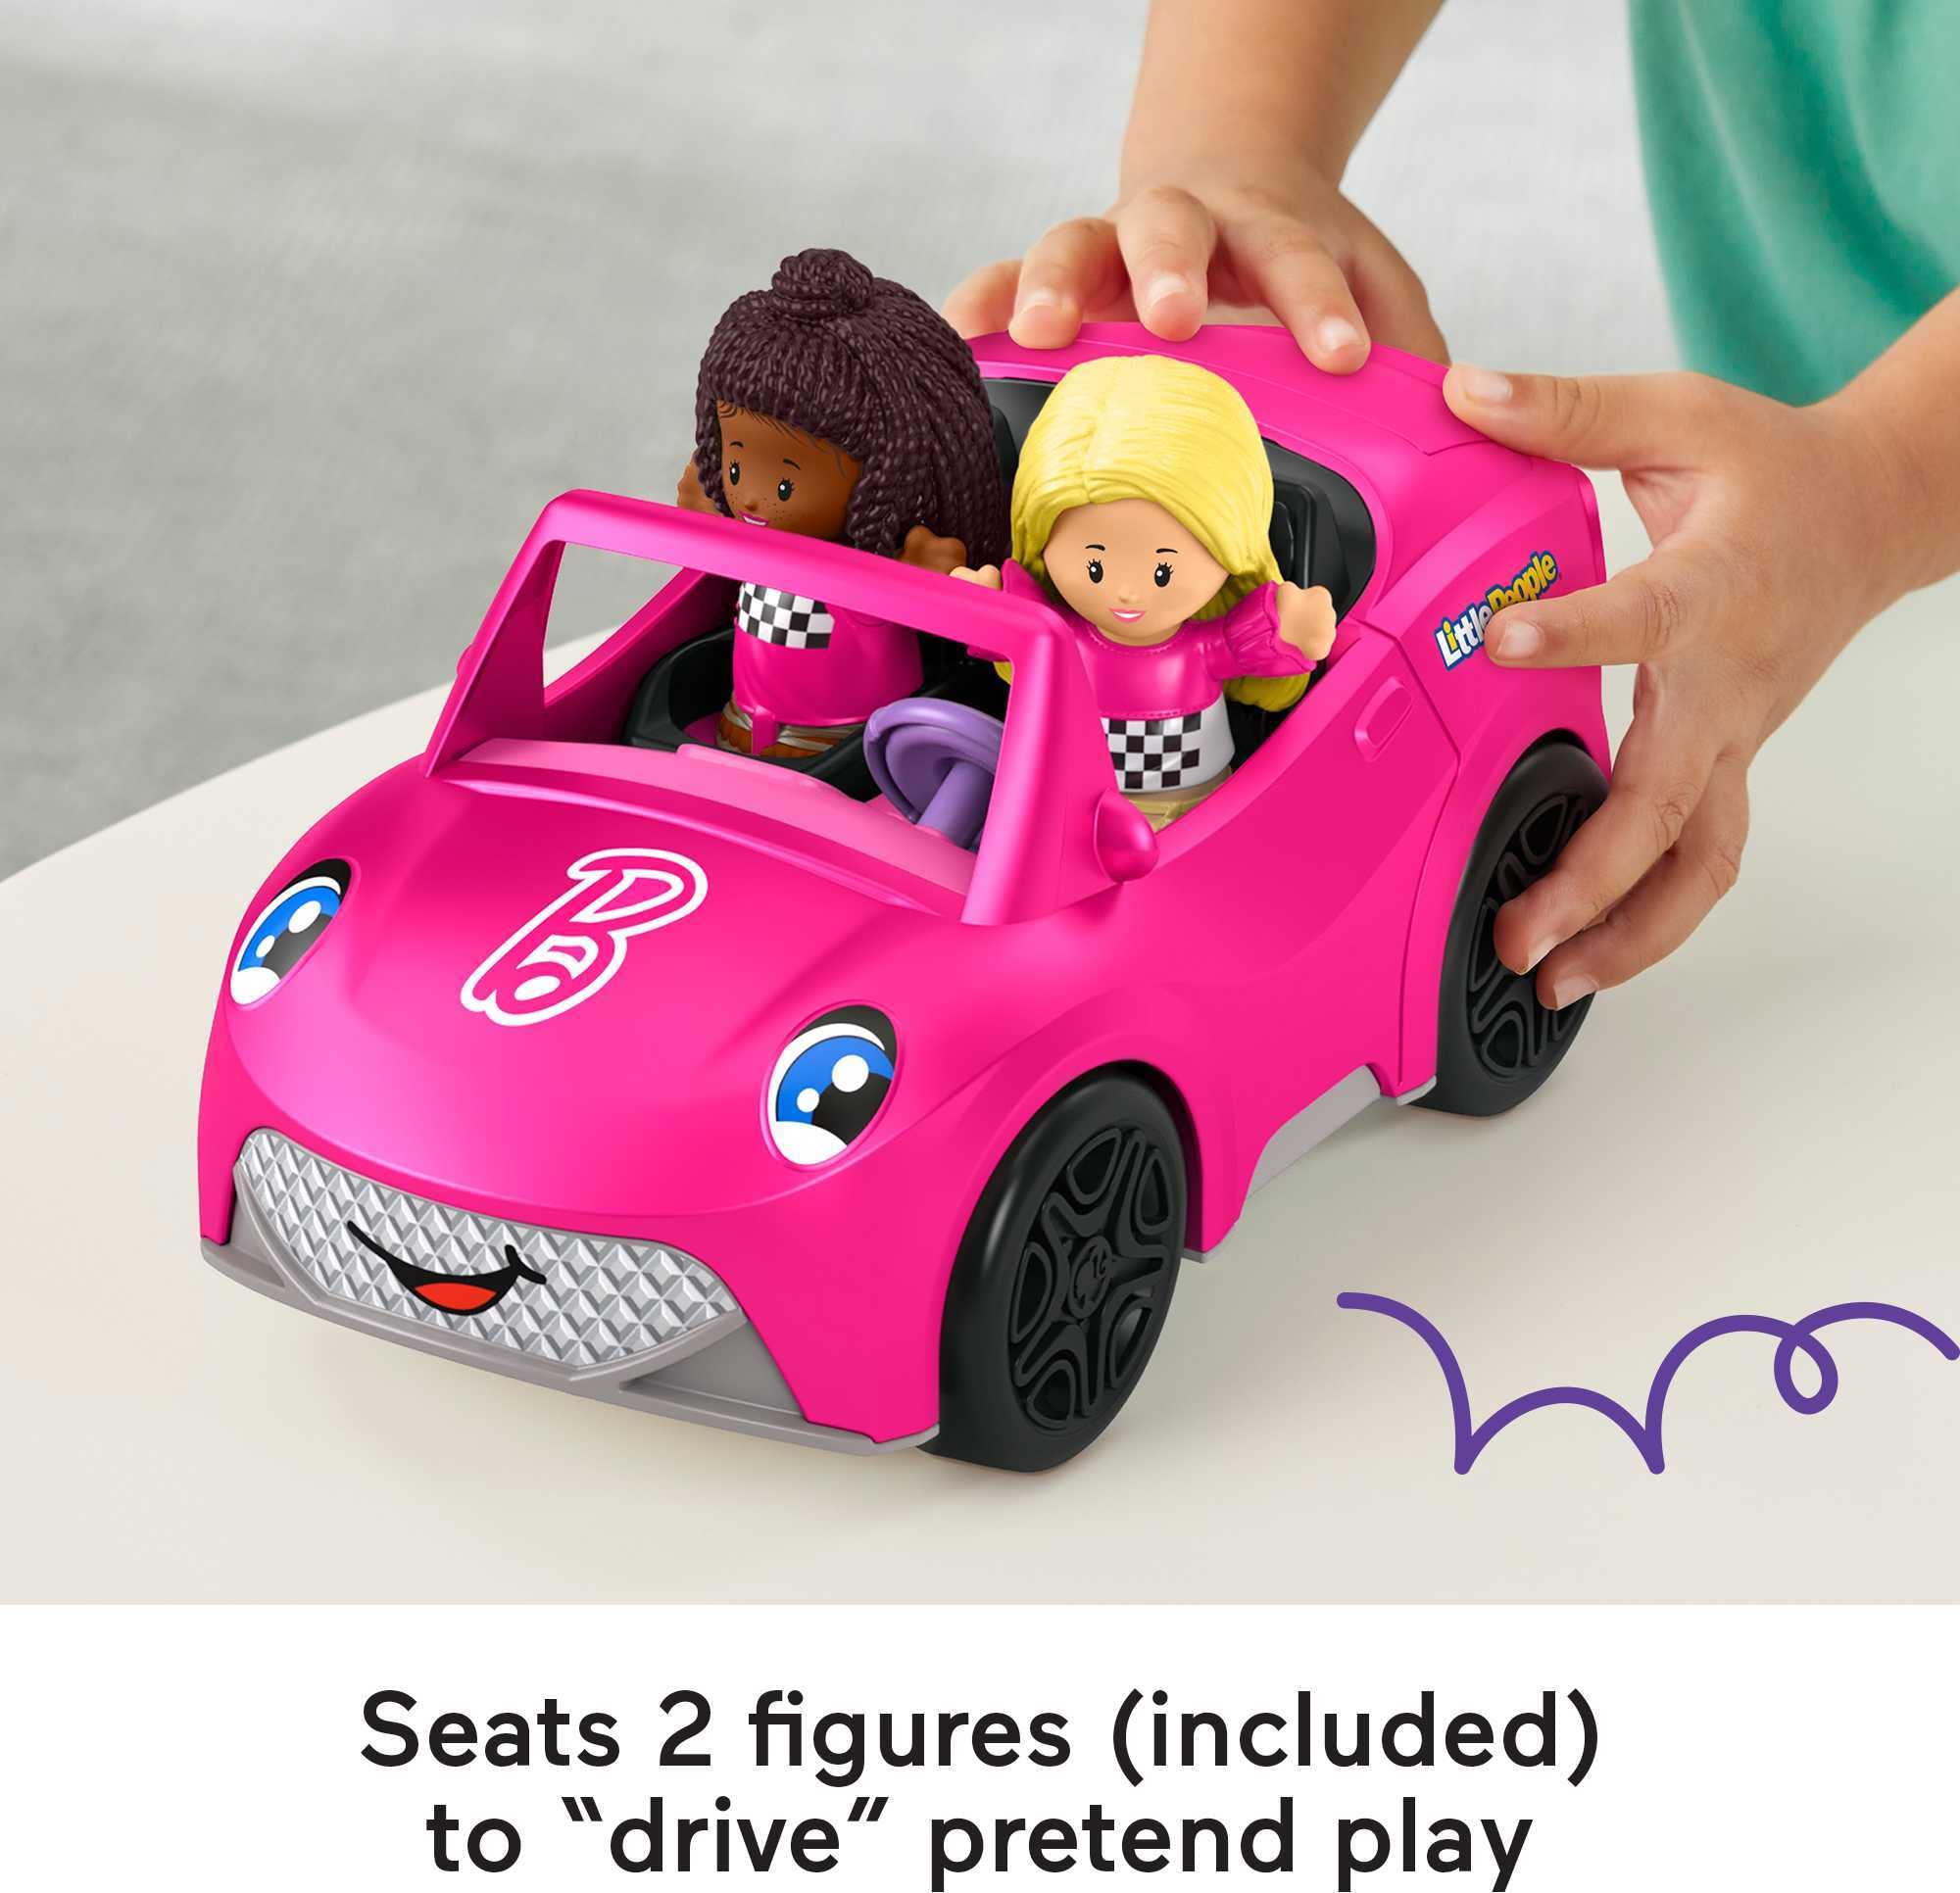 Little People Barbie Toddler Toy Car Convertible with Music Sounds & 2 Figures for Pretend Play Ages 18+ Months